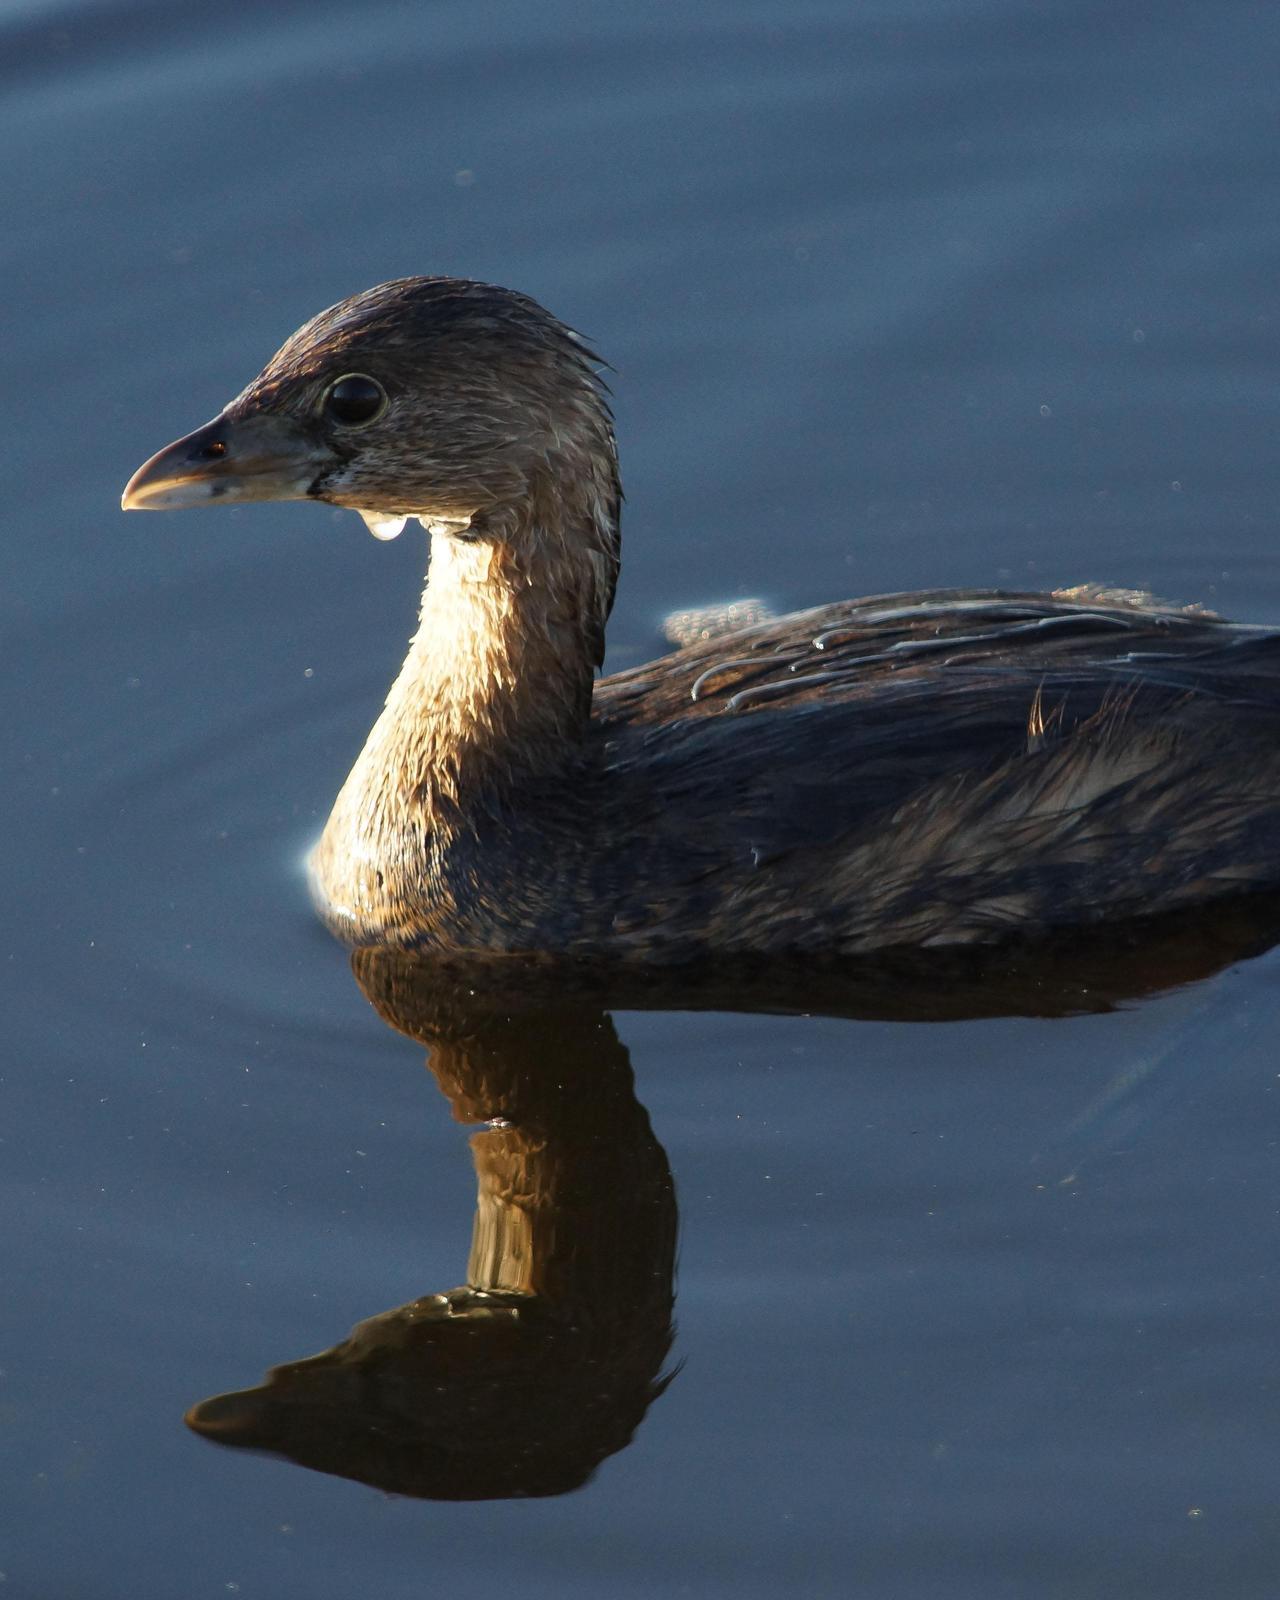 Pied-billed Grebe Photo by Steve Percival